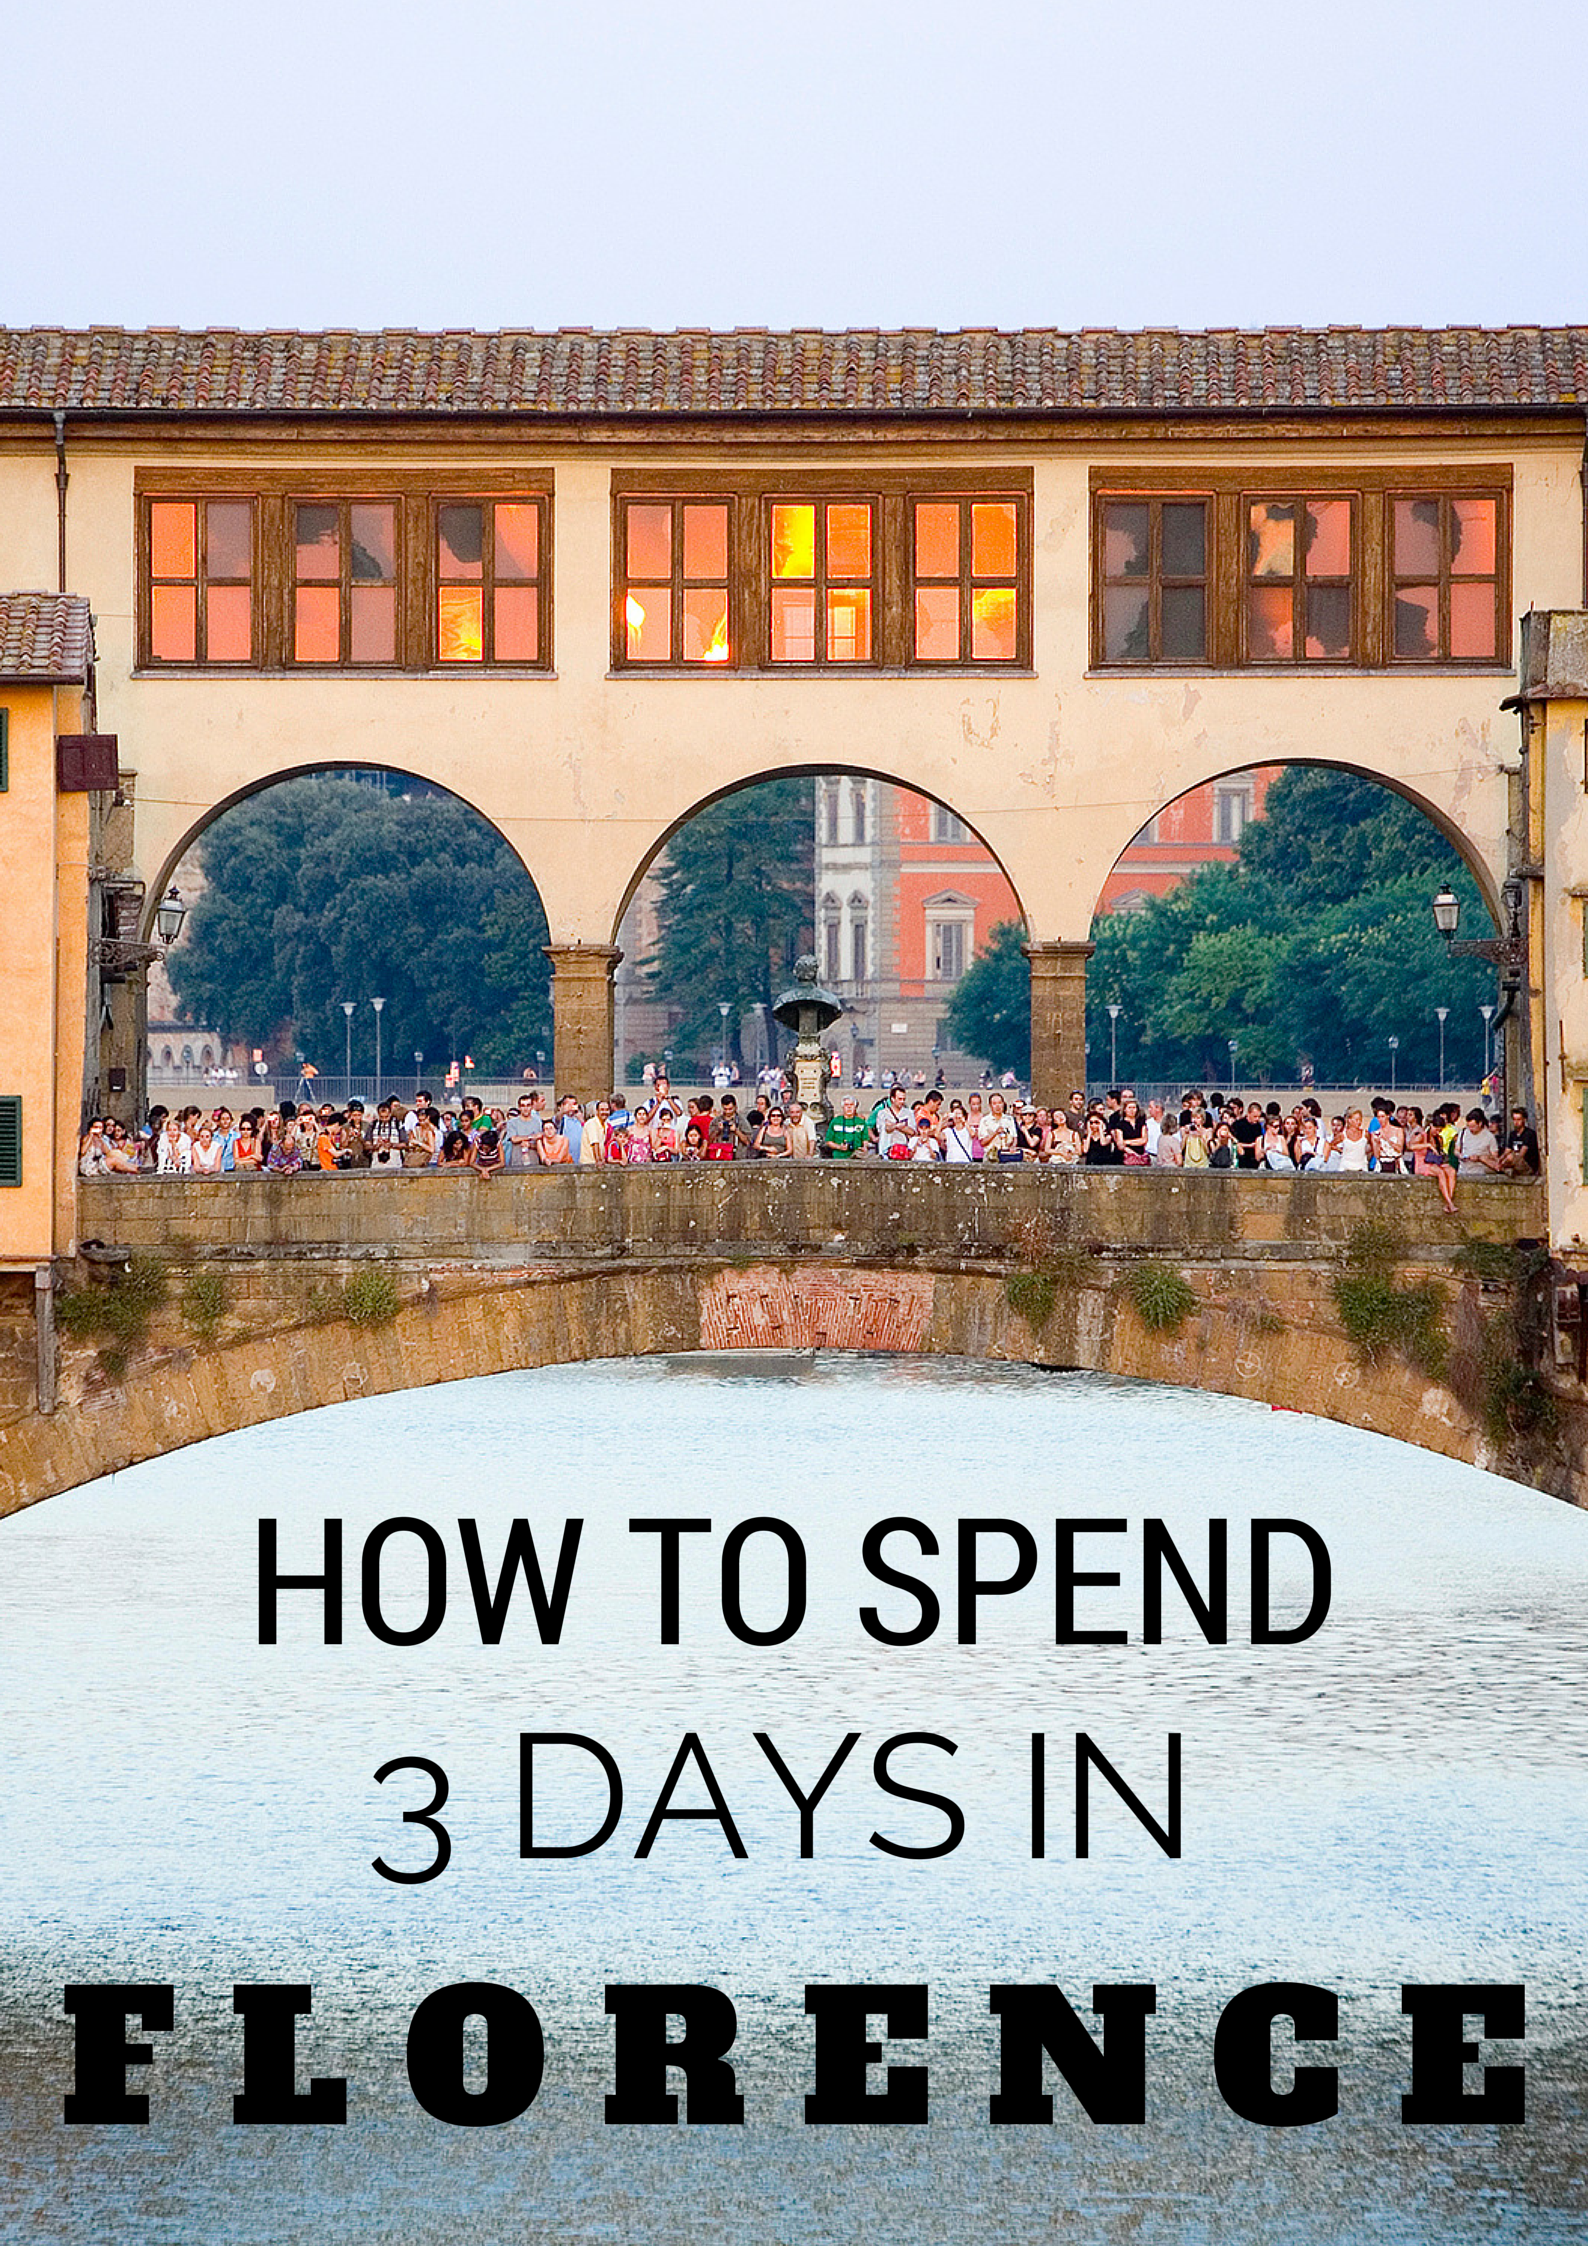 Your Guide for 3 Days In Florence